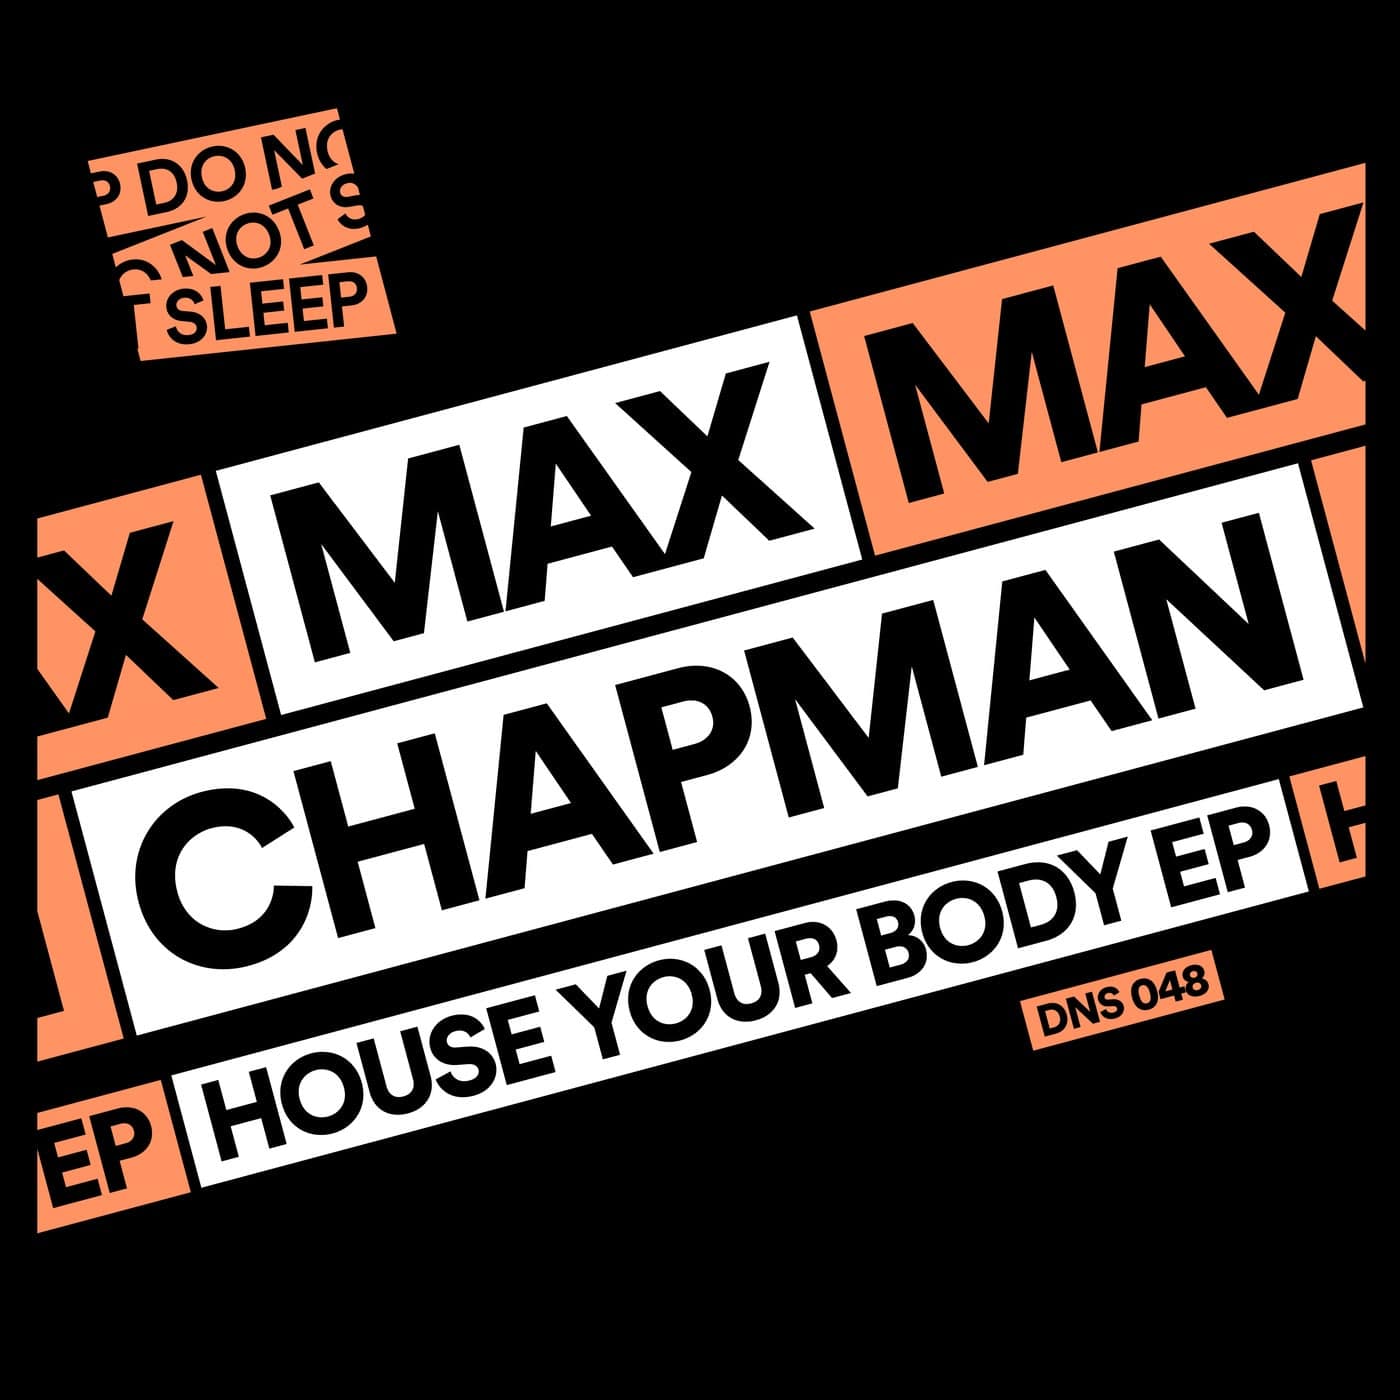 image cover: Max Chapman - House Your Body EP / DNS048